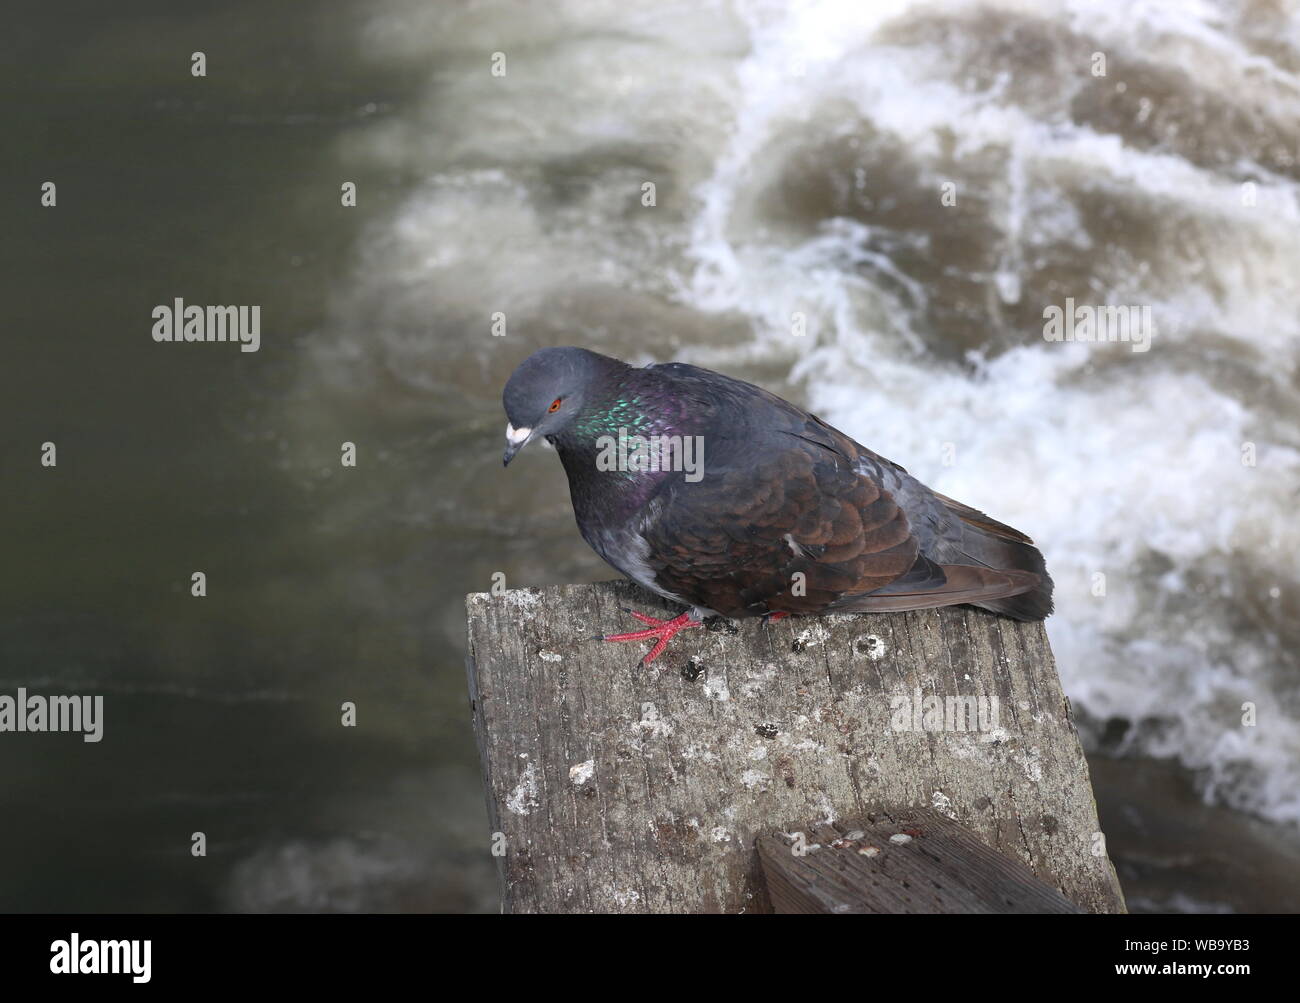 Black pigeon on a wooden pier by the ocean. Stock Photo